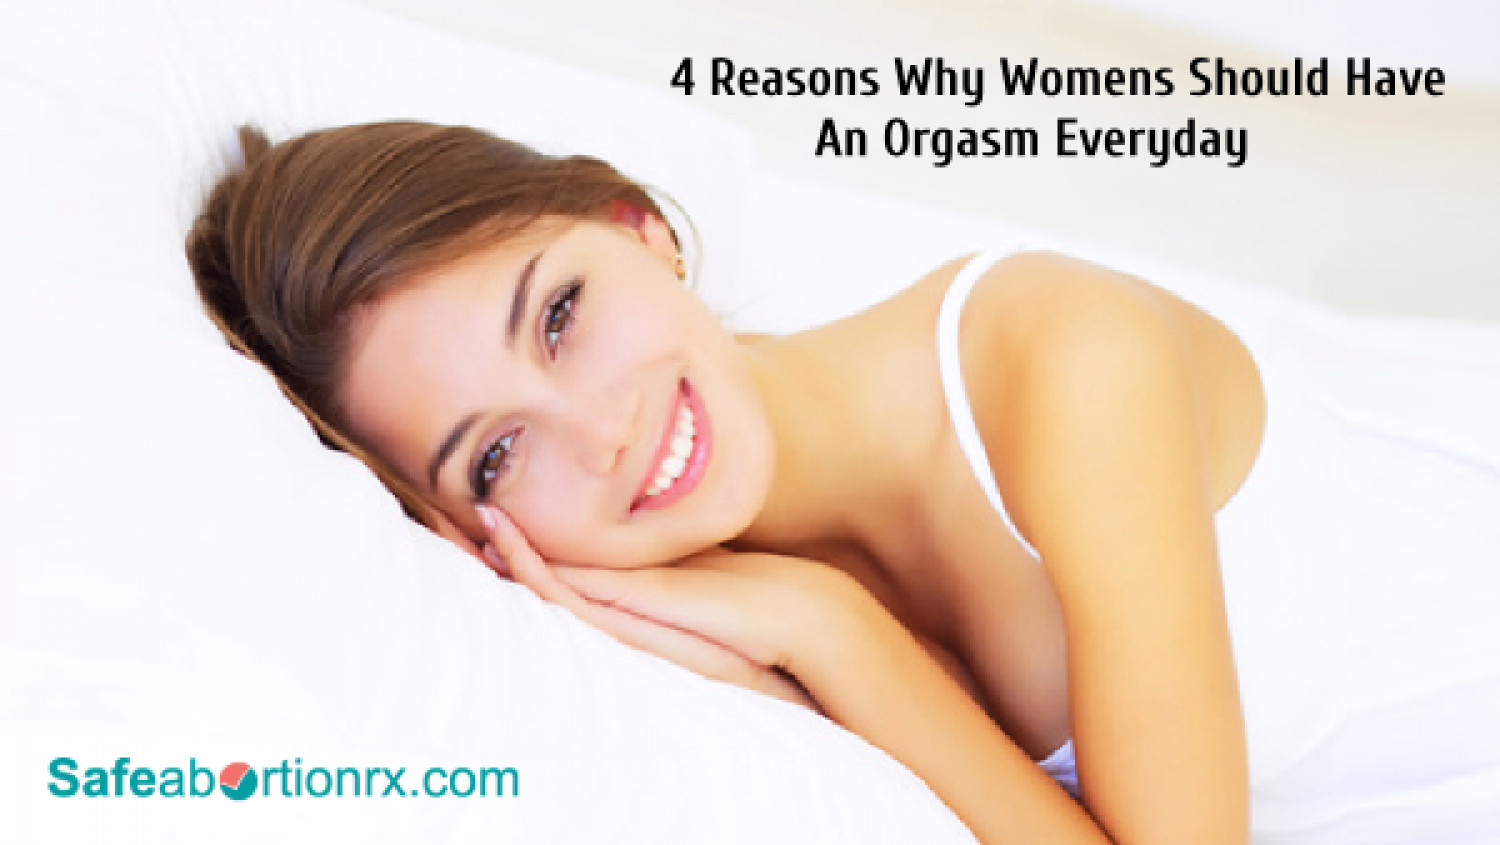 4 Reasons why woman should have an orgasm everyday Infographic